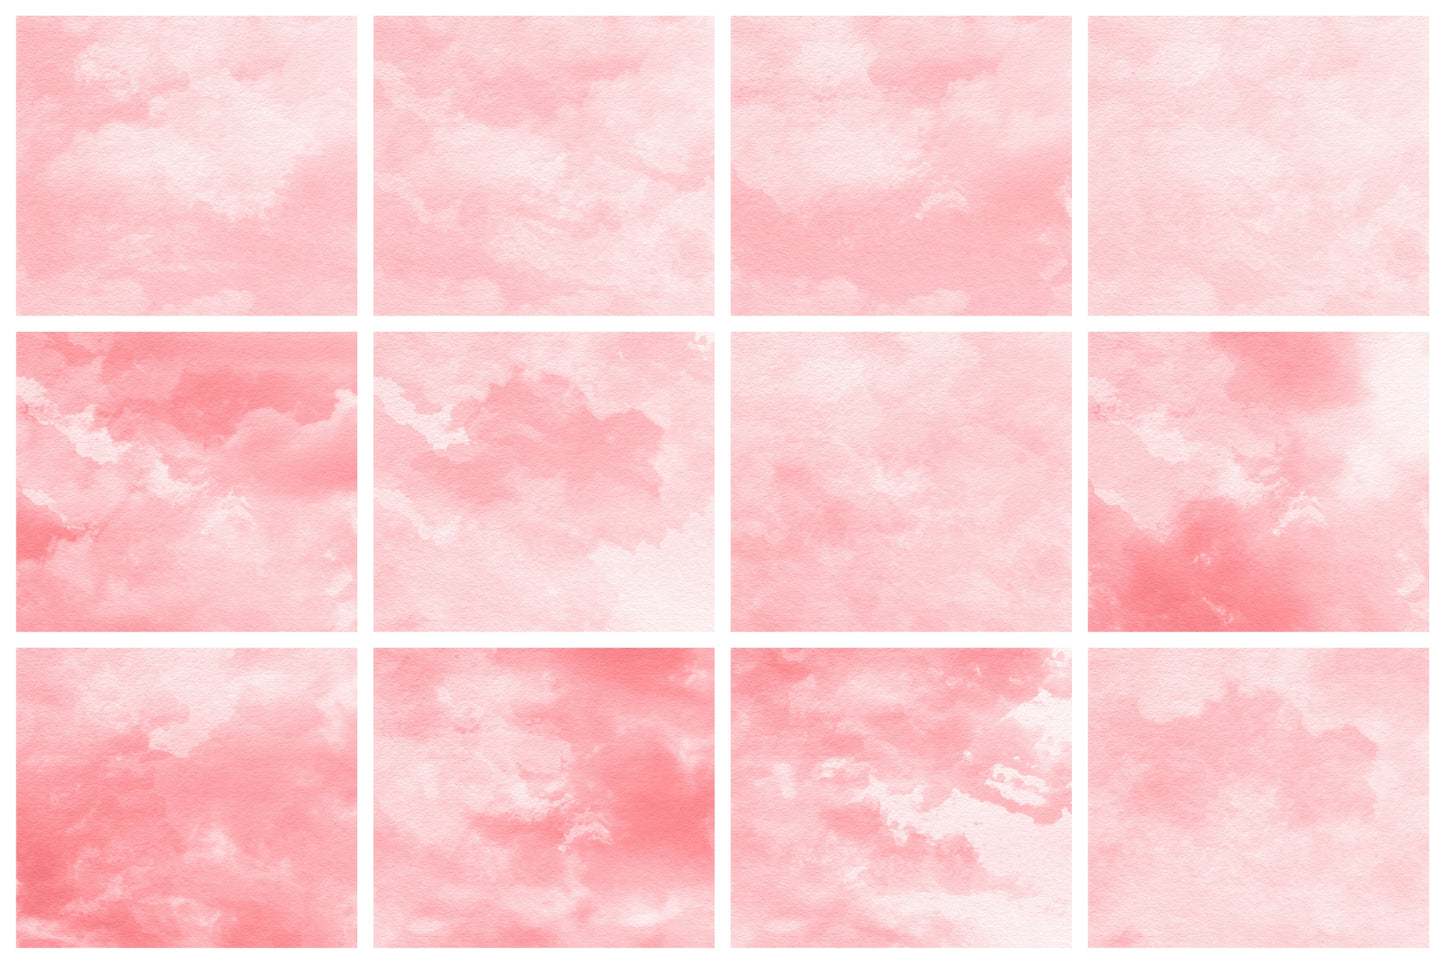 Watercolor Texture Backgrounds 02 Coral Red Watercolor Textures